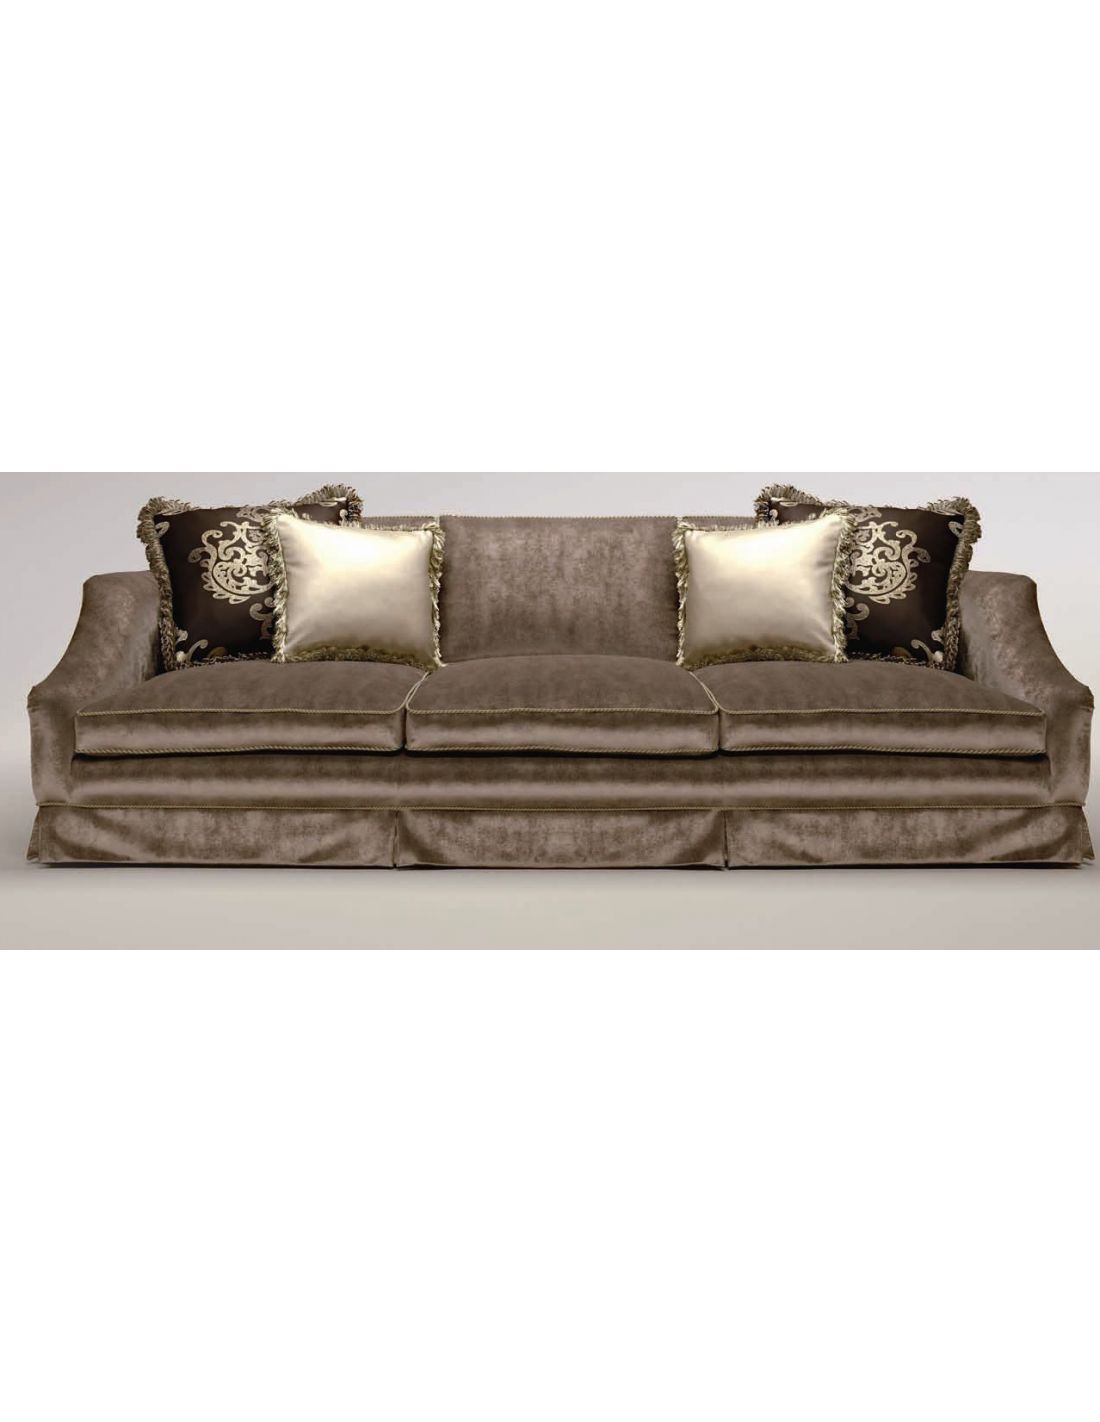 Upholstered Sofa With Curved Arms In Sofas With Curved Arms (Gallery 15 of 20)